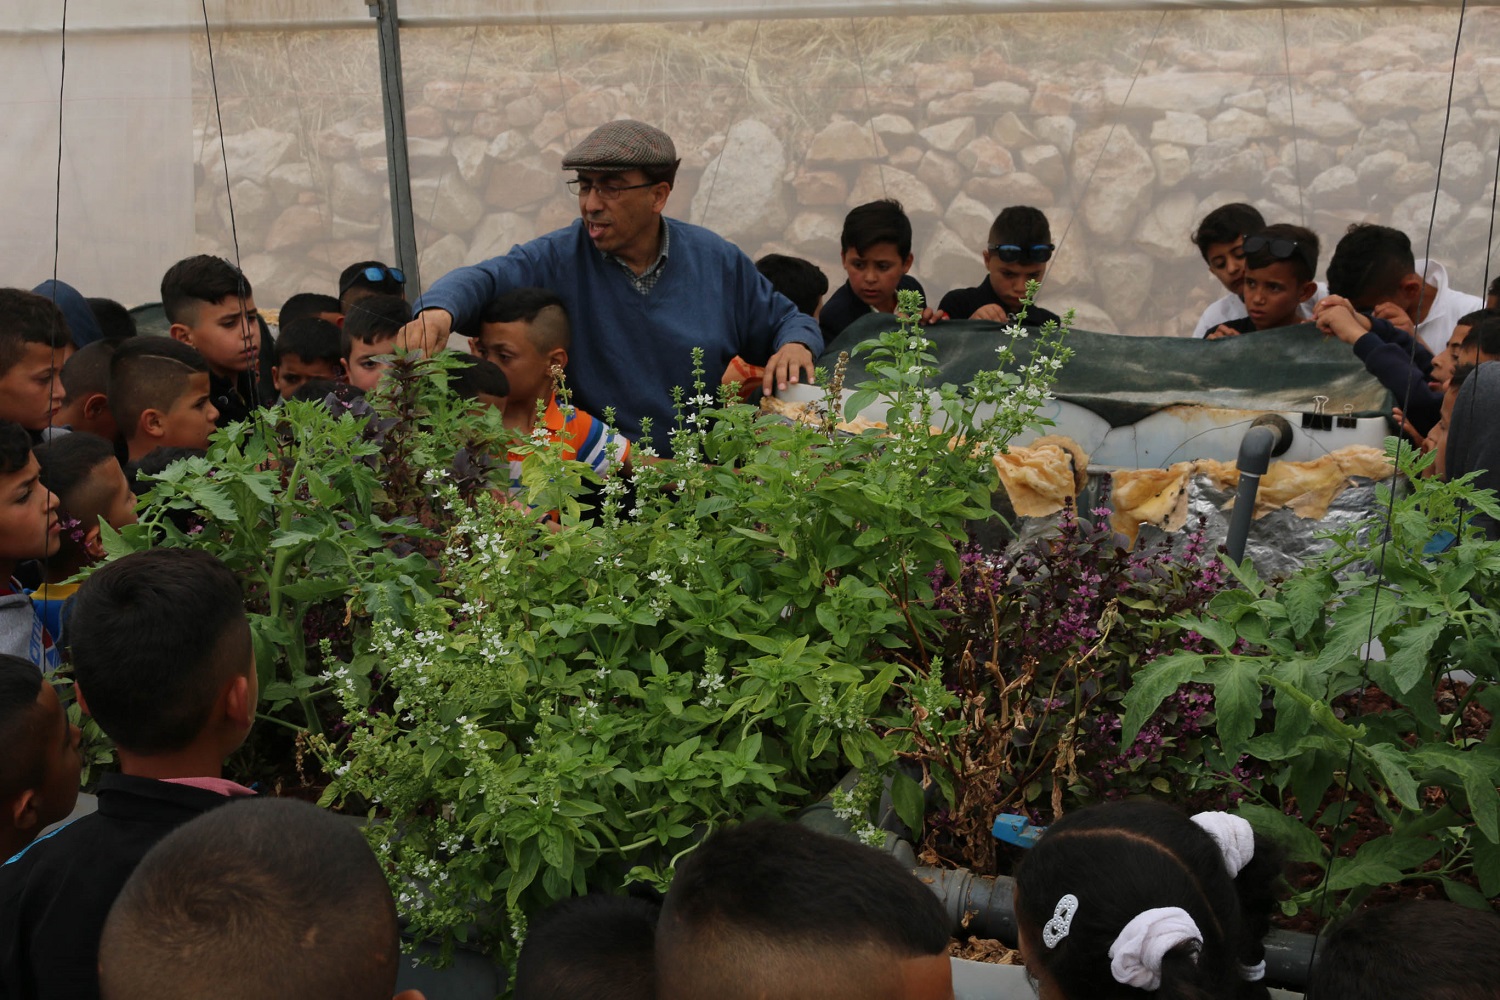 "Dr Qumsiyeh shows a tour group of local children vegetables and herbs growing in an aquaponics system in the museum's greenhouse